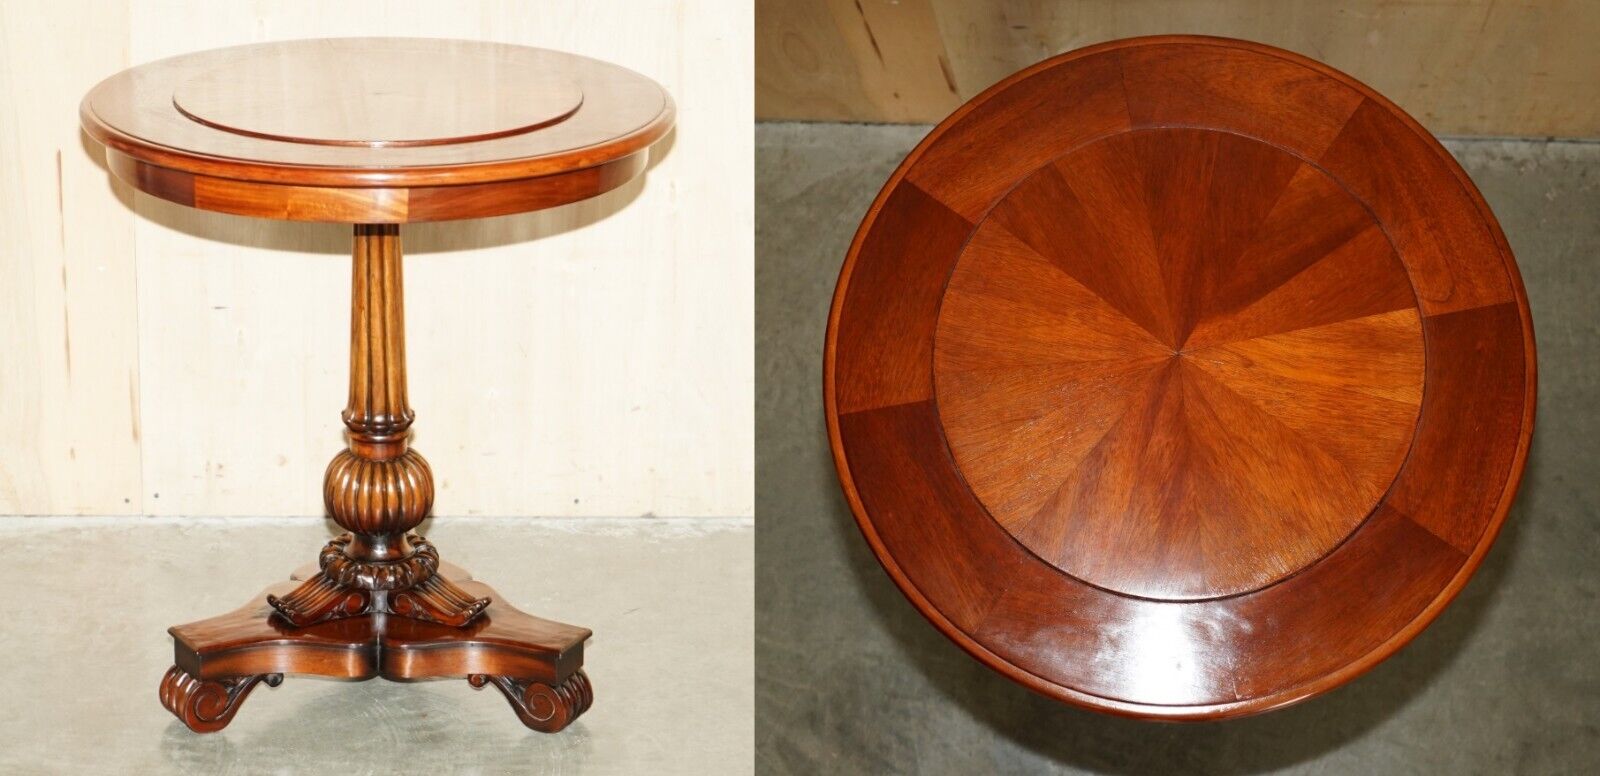 FULLY RESTORED FRENCH POLISHED RALPH LAUREN LARGE SIDE / SMALL OCCASIONAL TABLE